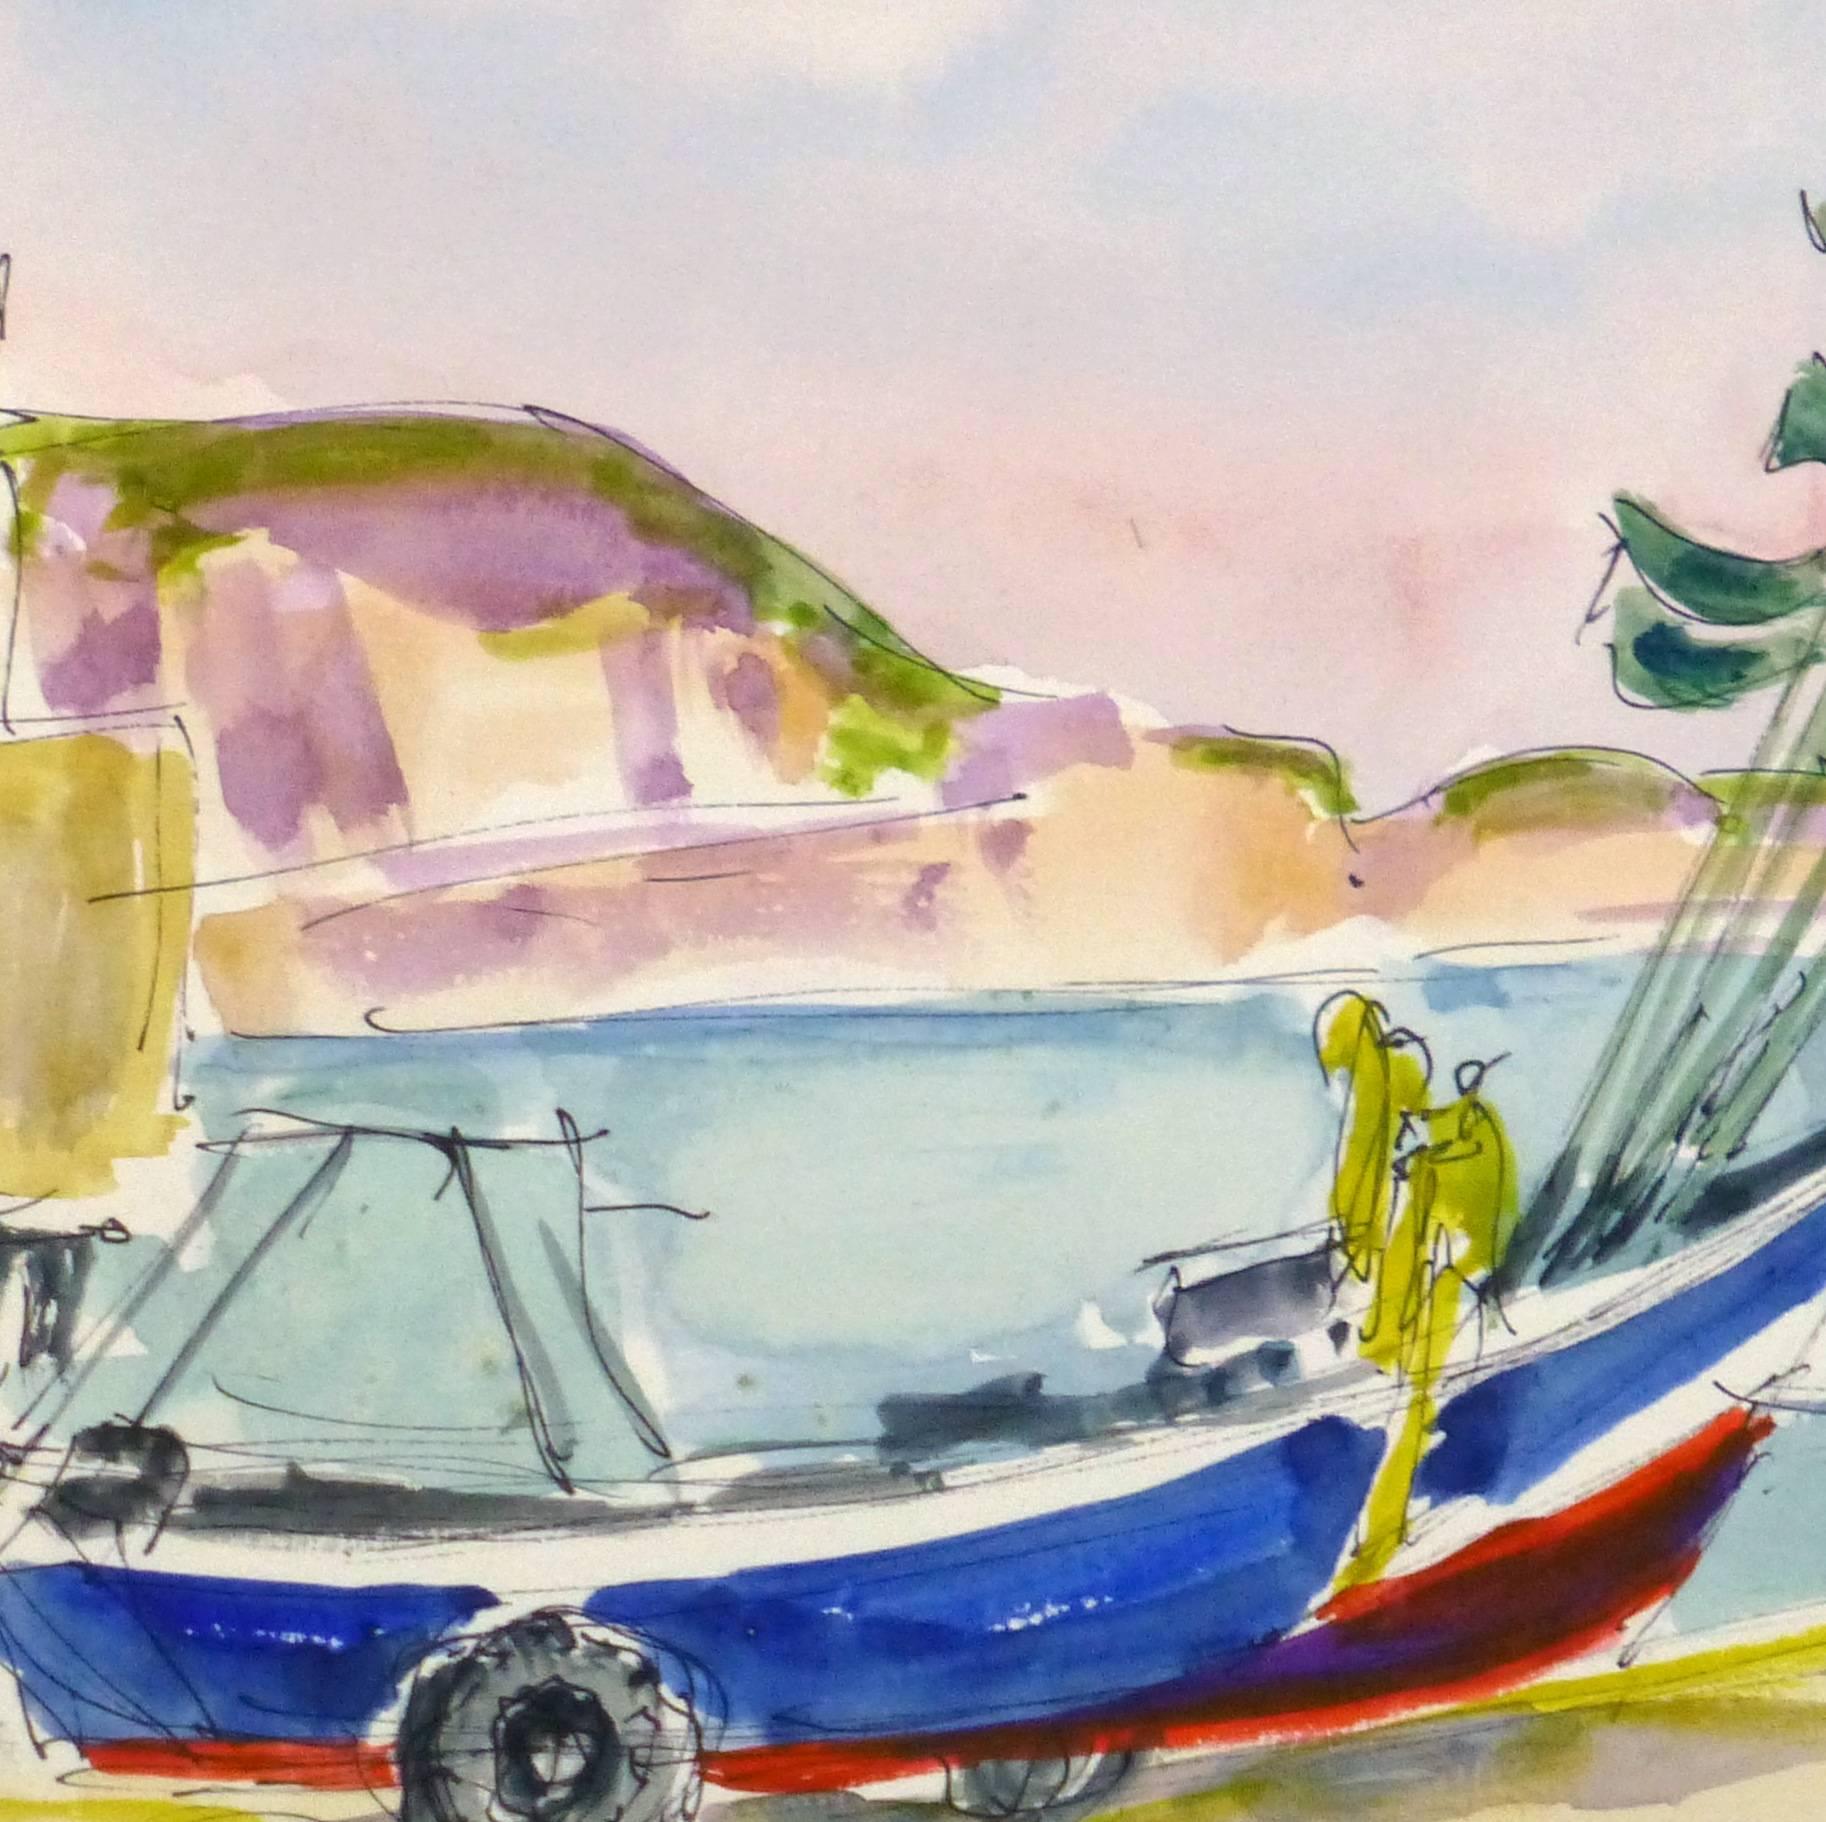 French Watercolor Seascape - All In a Day's Work - Art by Marguerite Bermond